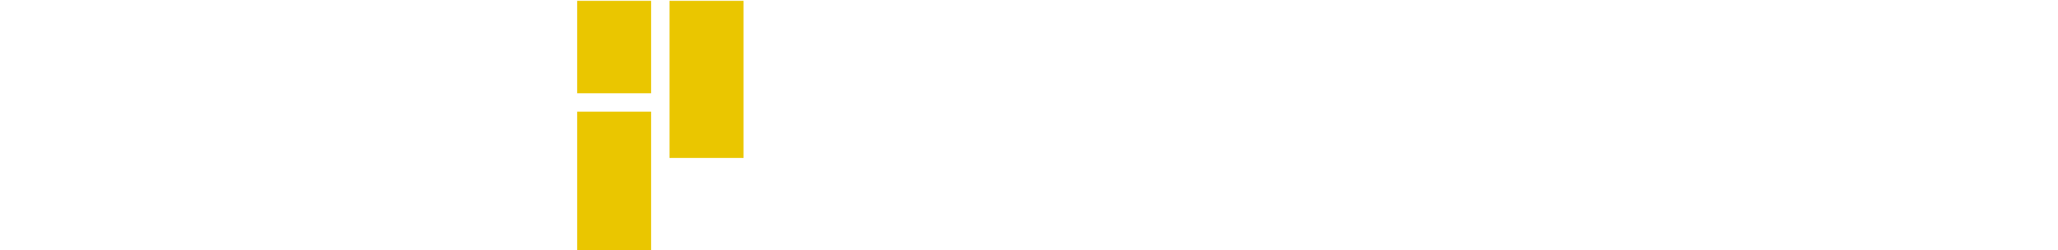 Primary Vision Network